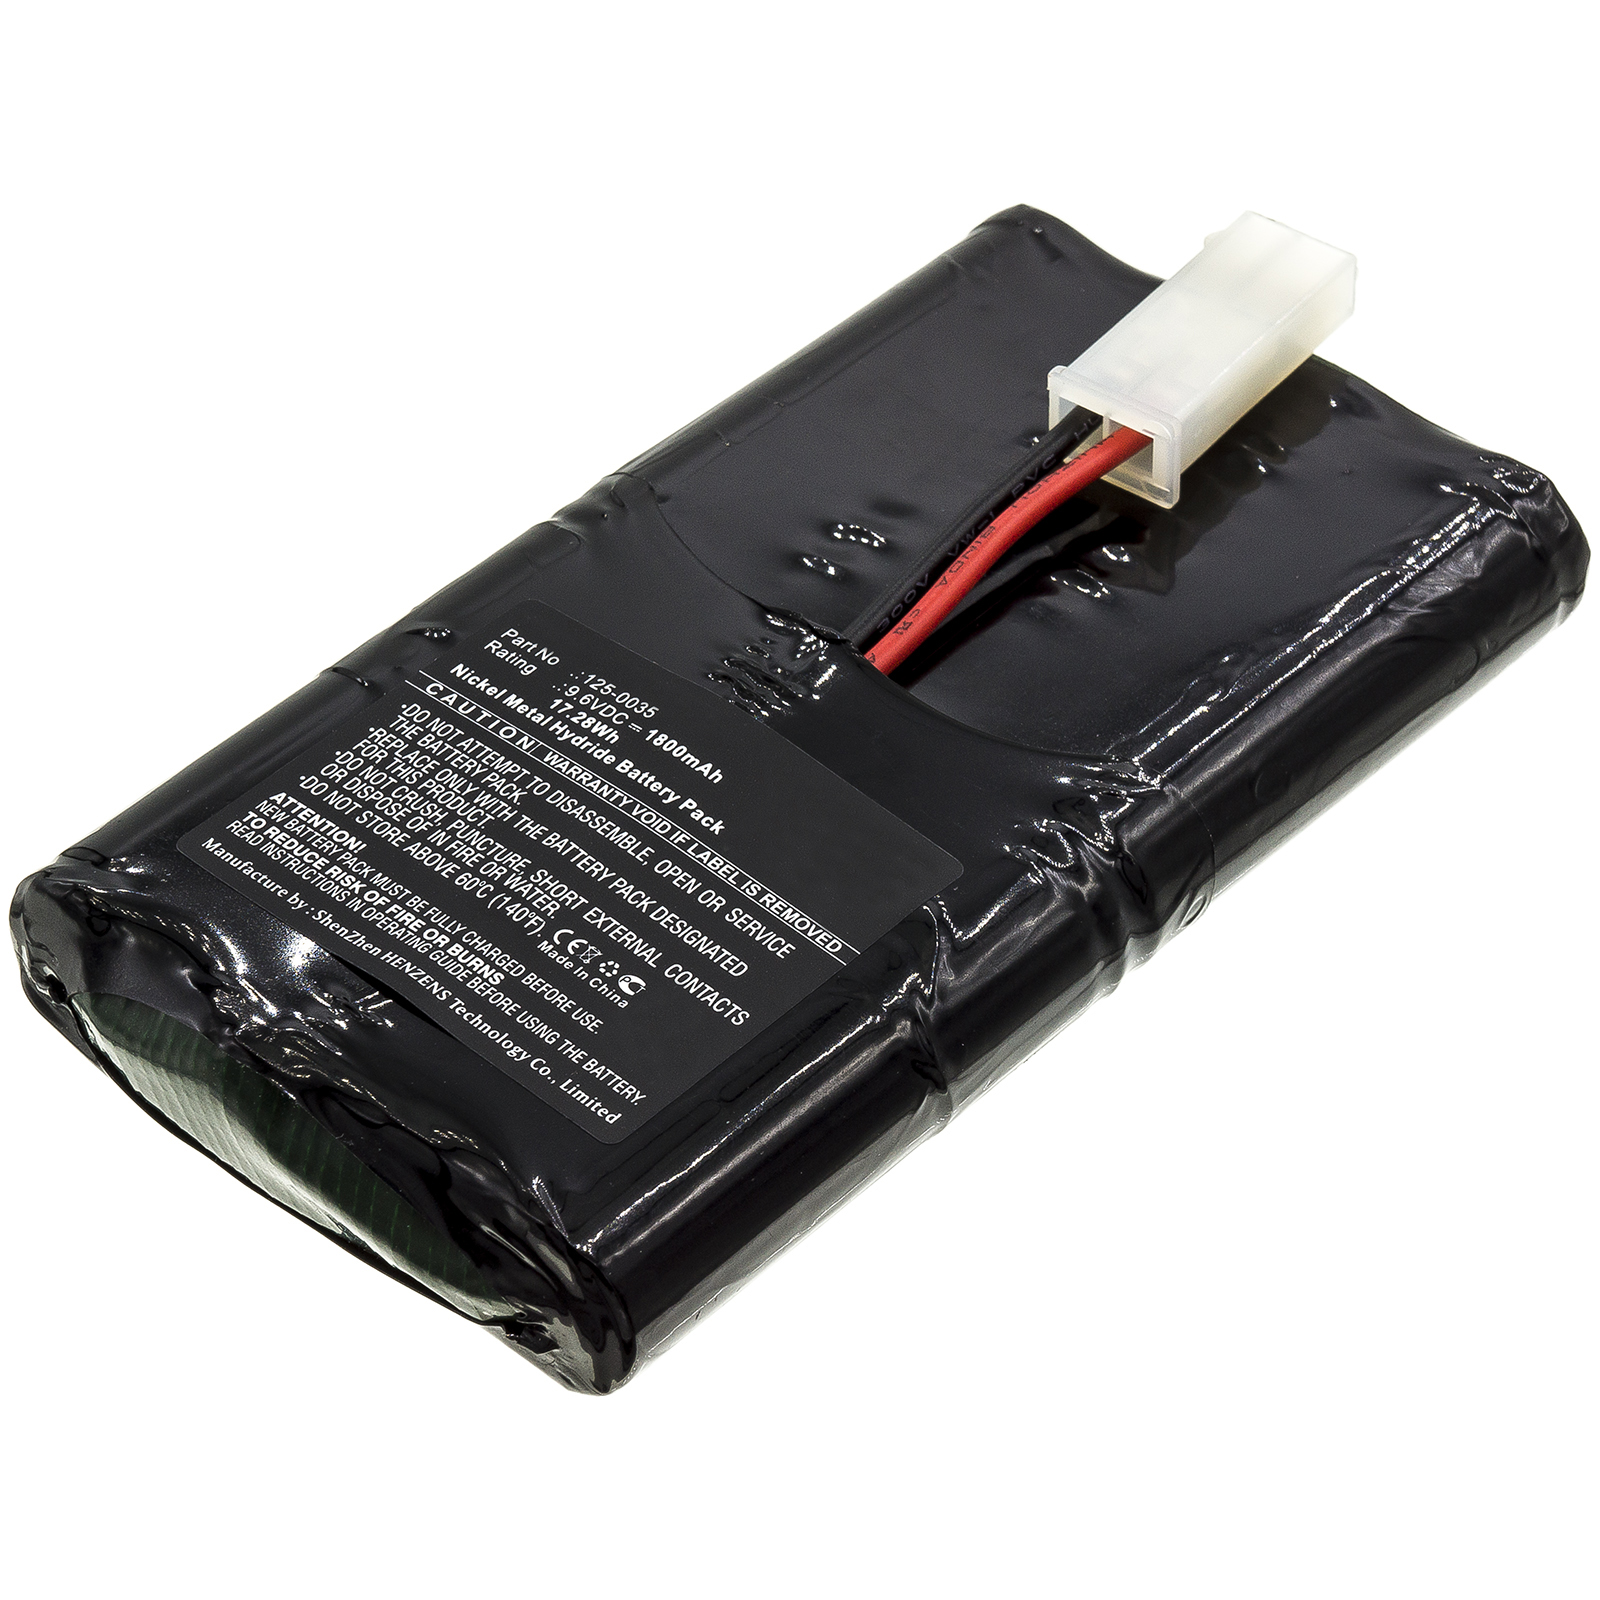 Synergy Digital Equipment Battery, Compatible with Franklin 125-0035 Equipment Battery (9.6V, Ni-MH, 1800mAh)